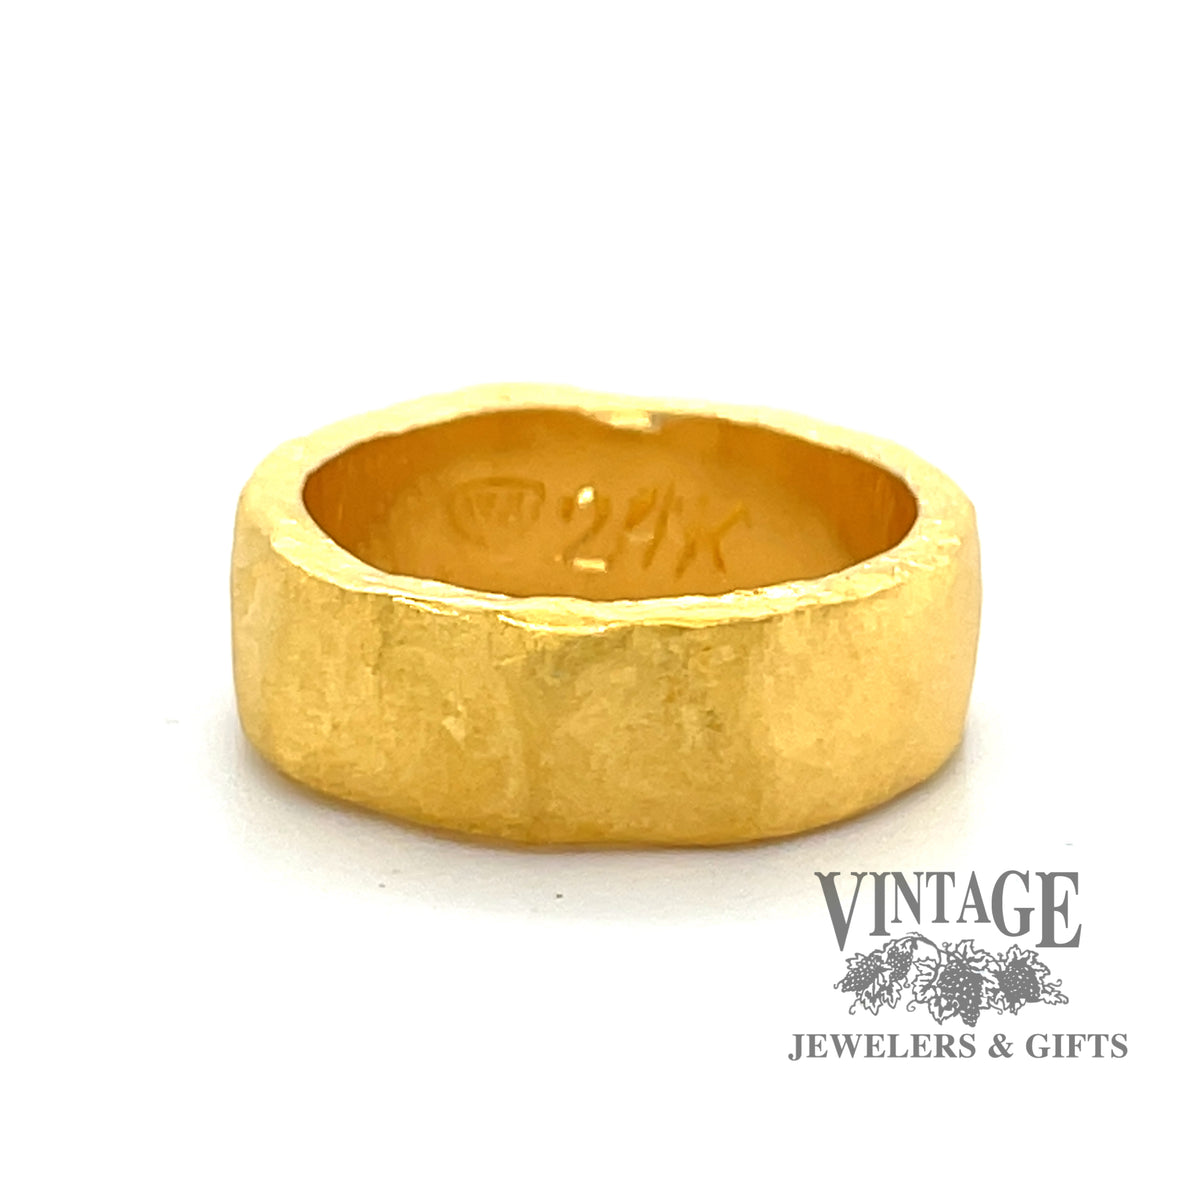 Interactie Welsprekend Conclusie 24 karat gold hand forged rustic 7mm ring — Vintage Jewelers & Gifts, LLC.